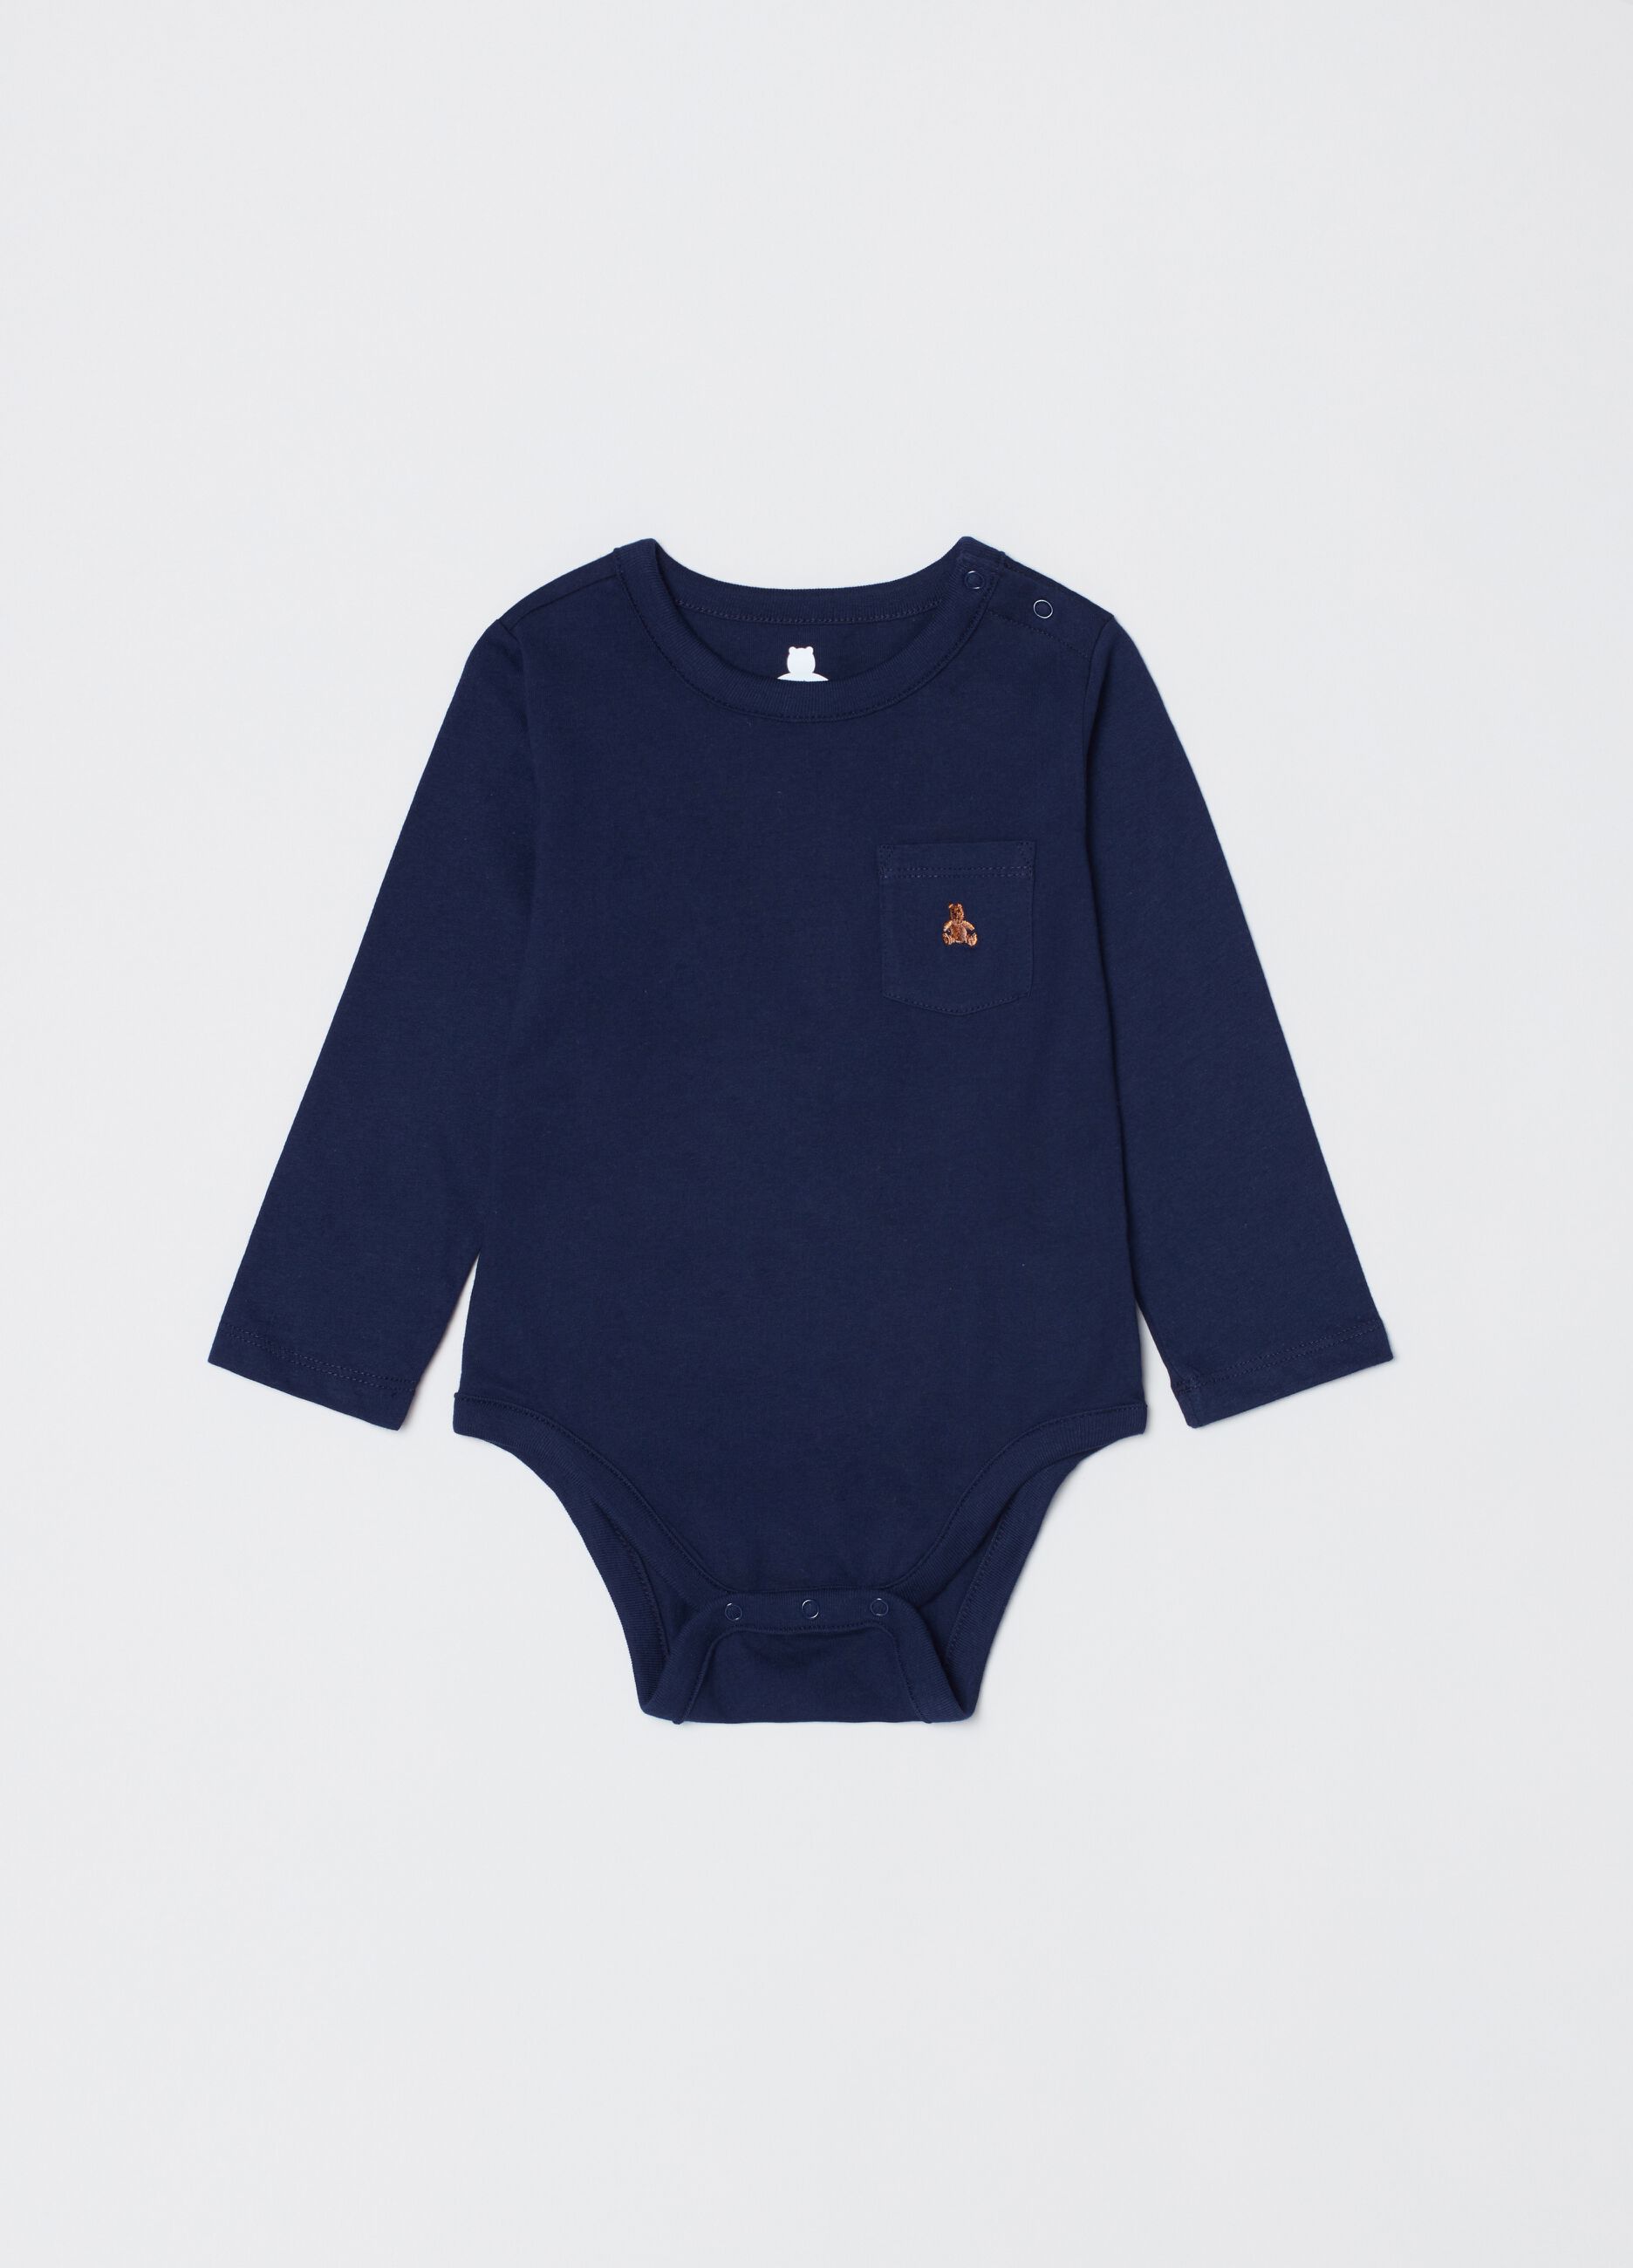 Organic cotton bodysuit with embroidered bear